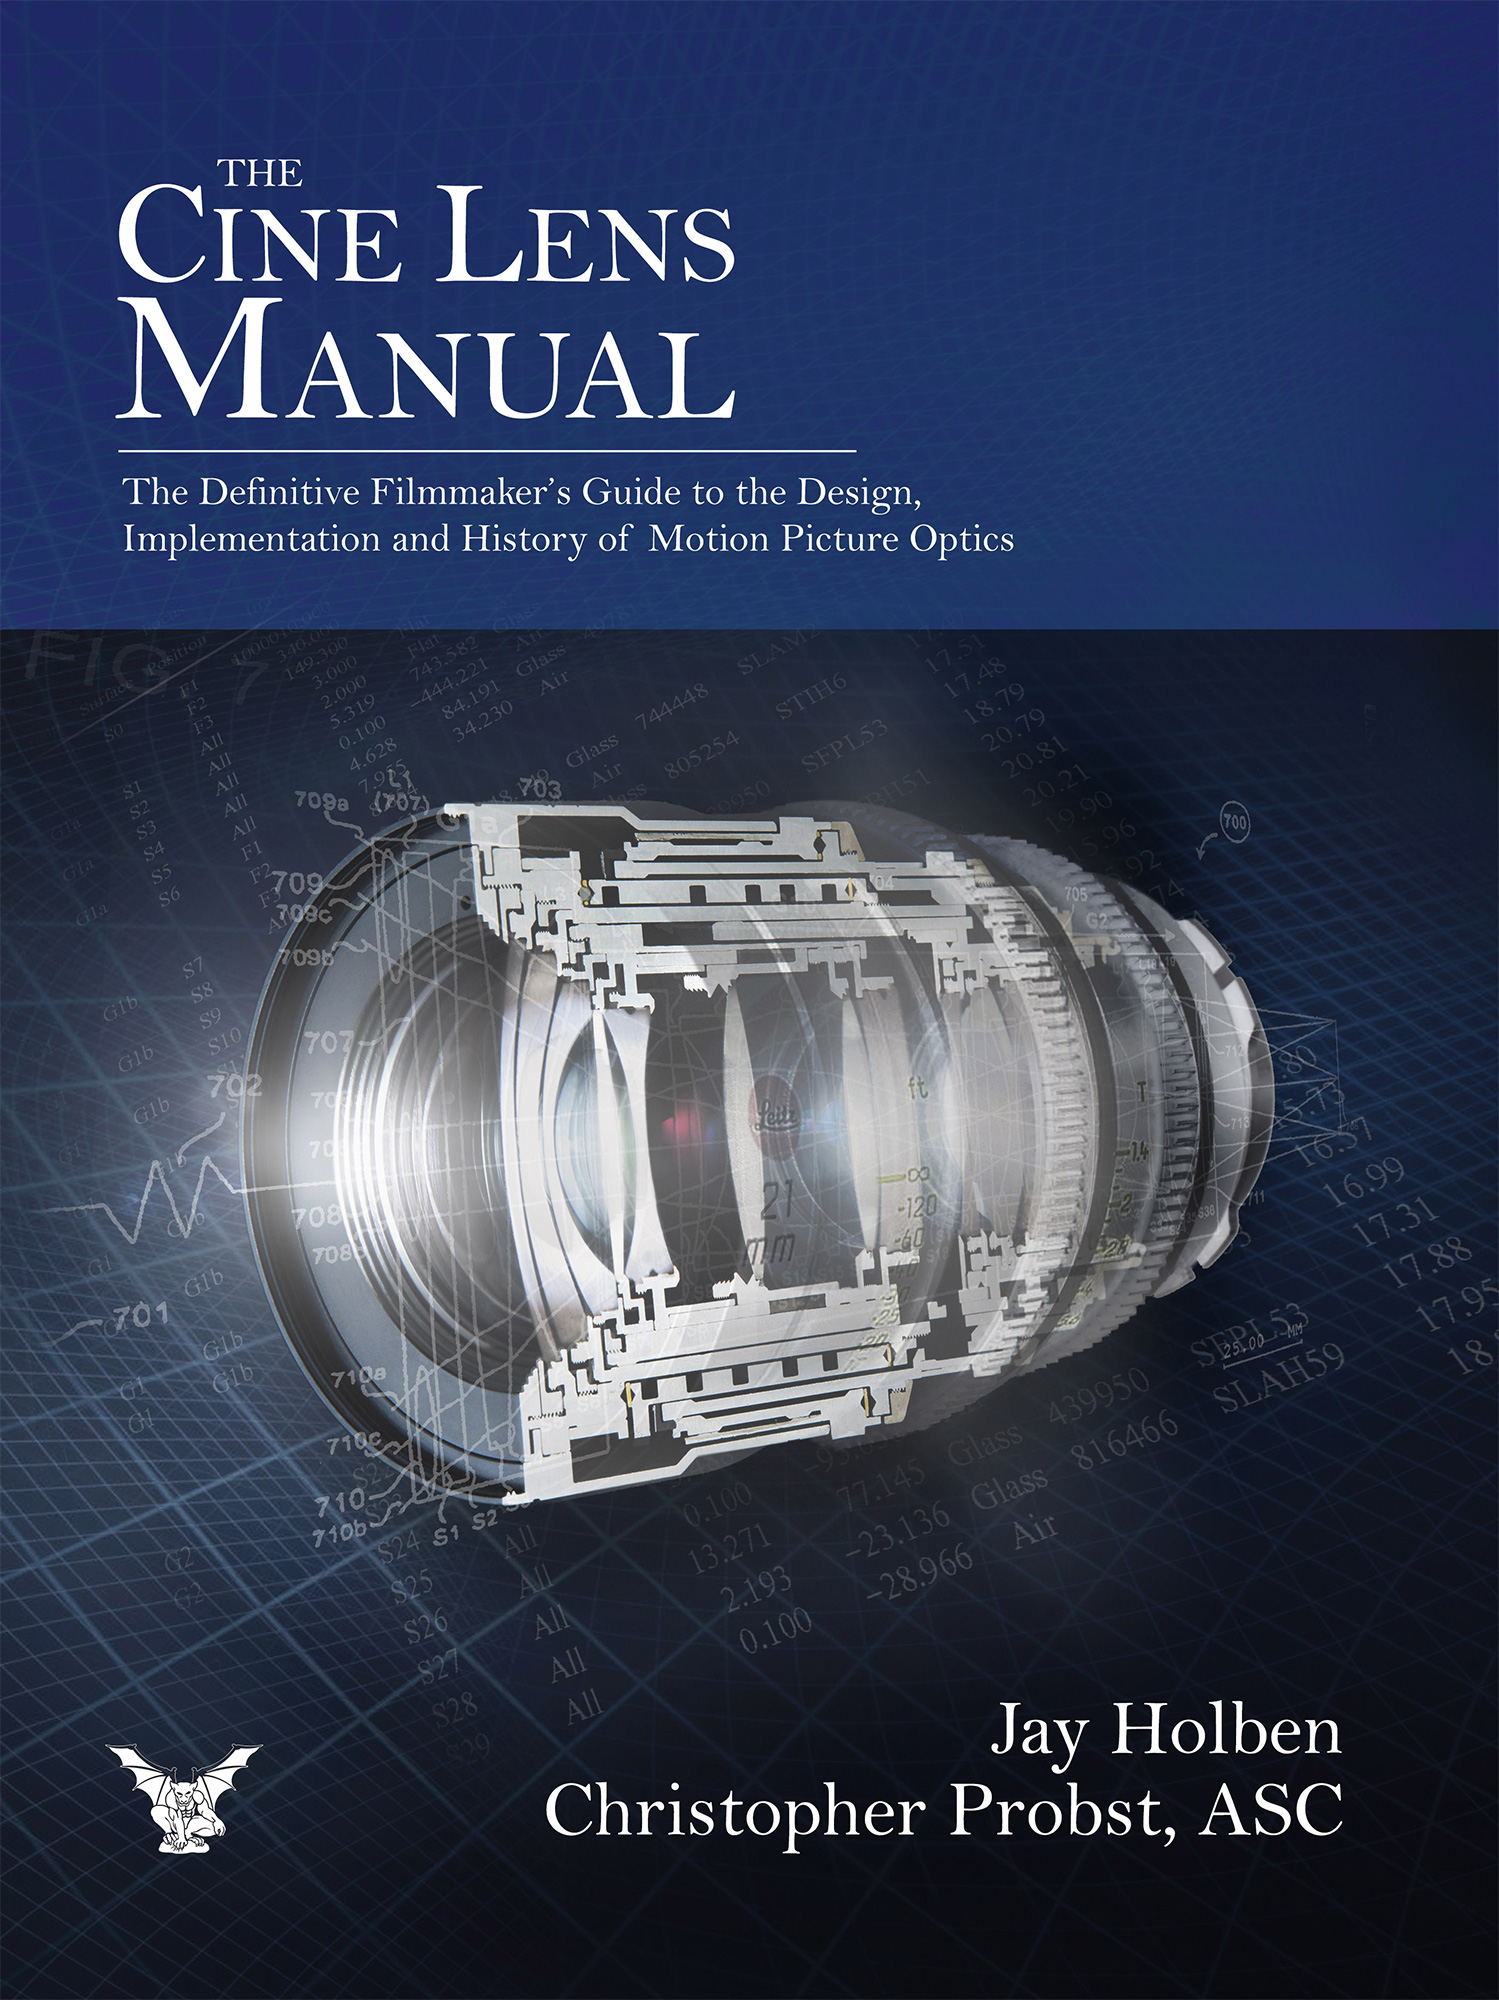 The Cine Lens Manual book has arrived!